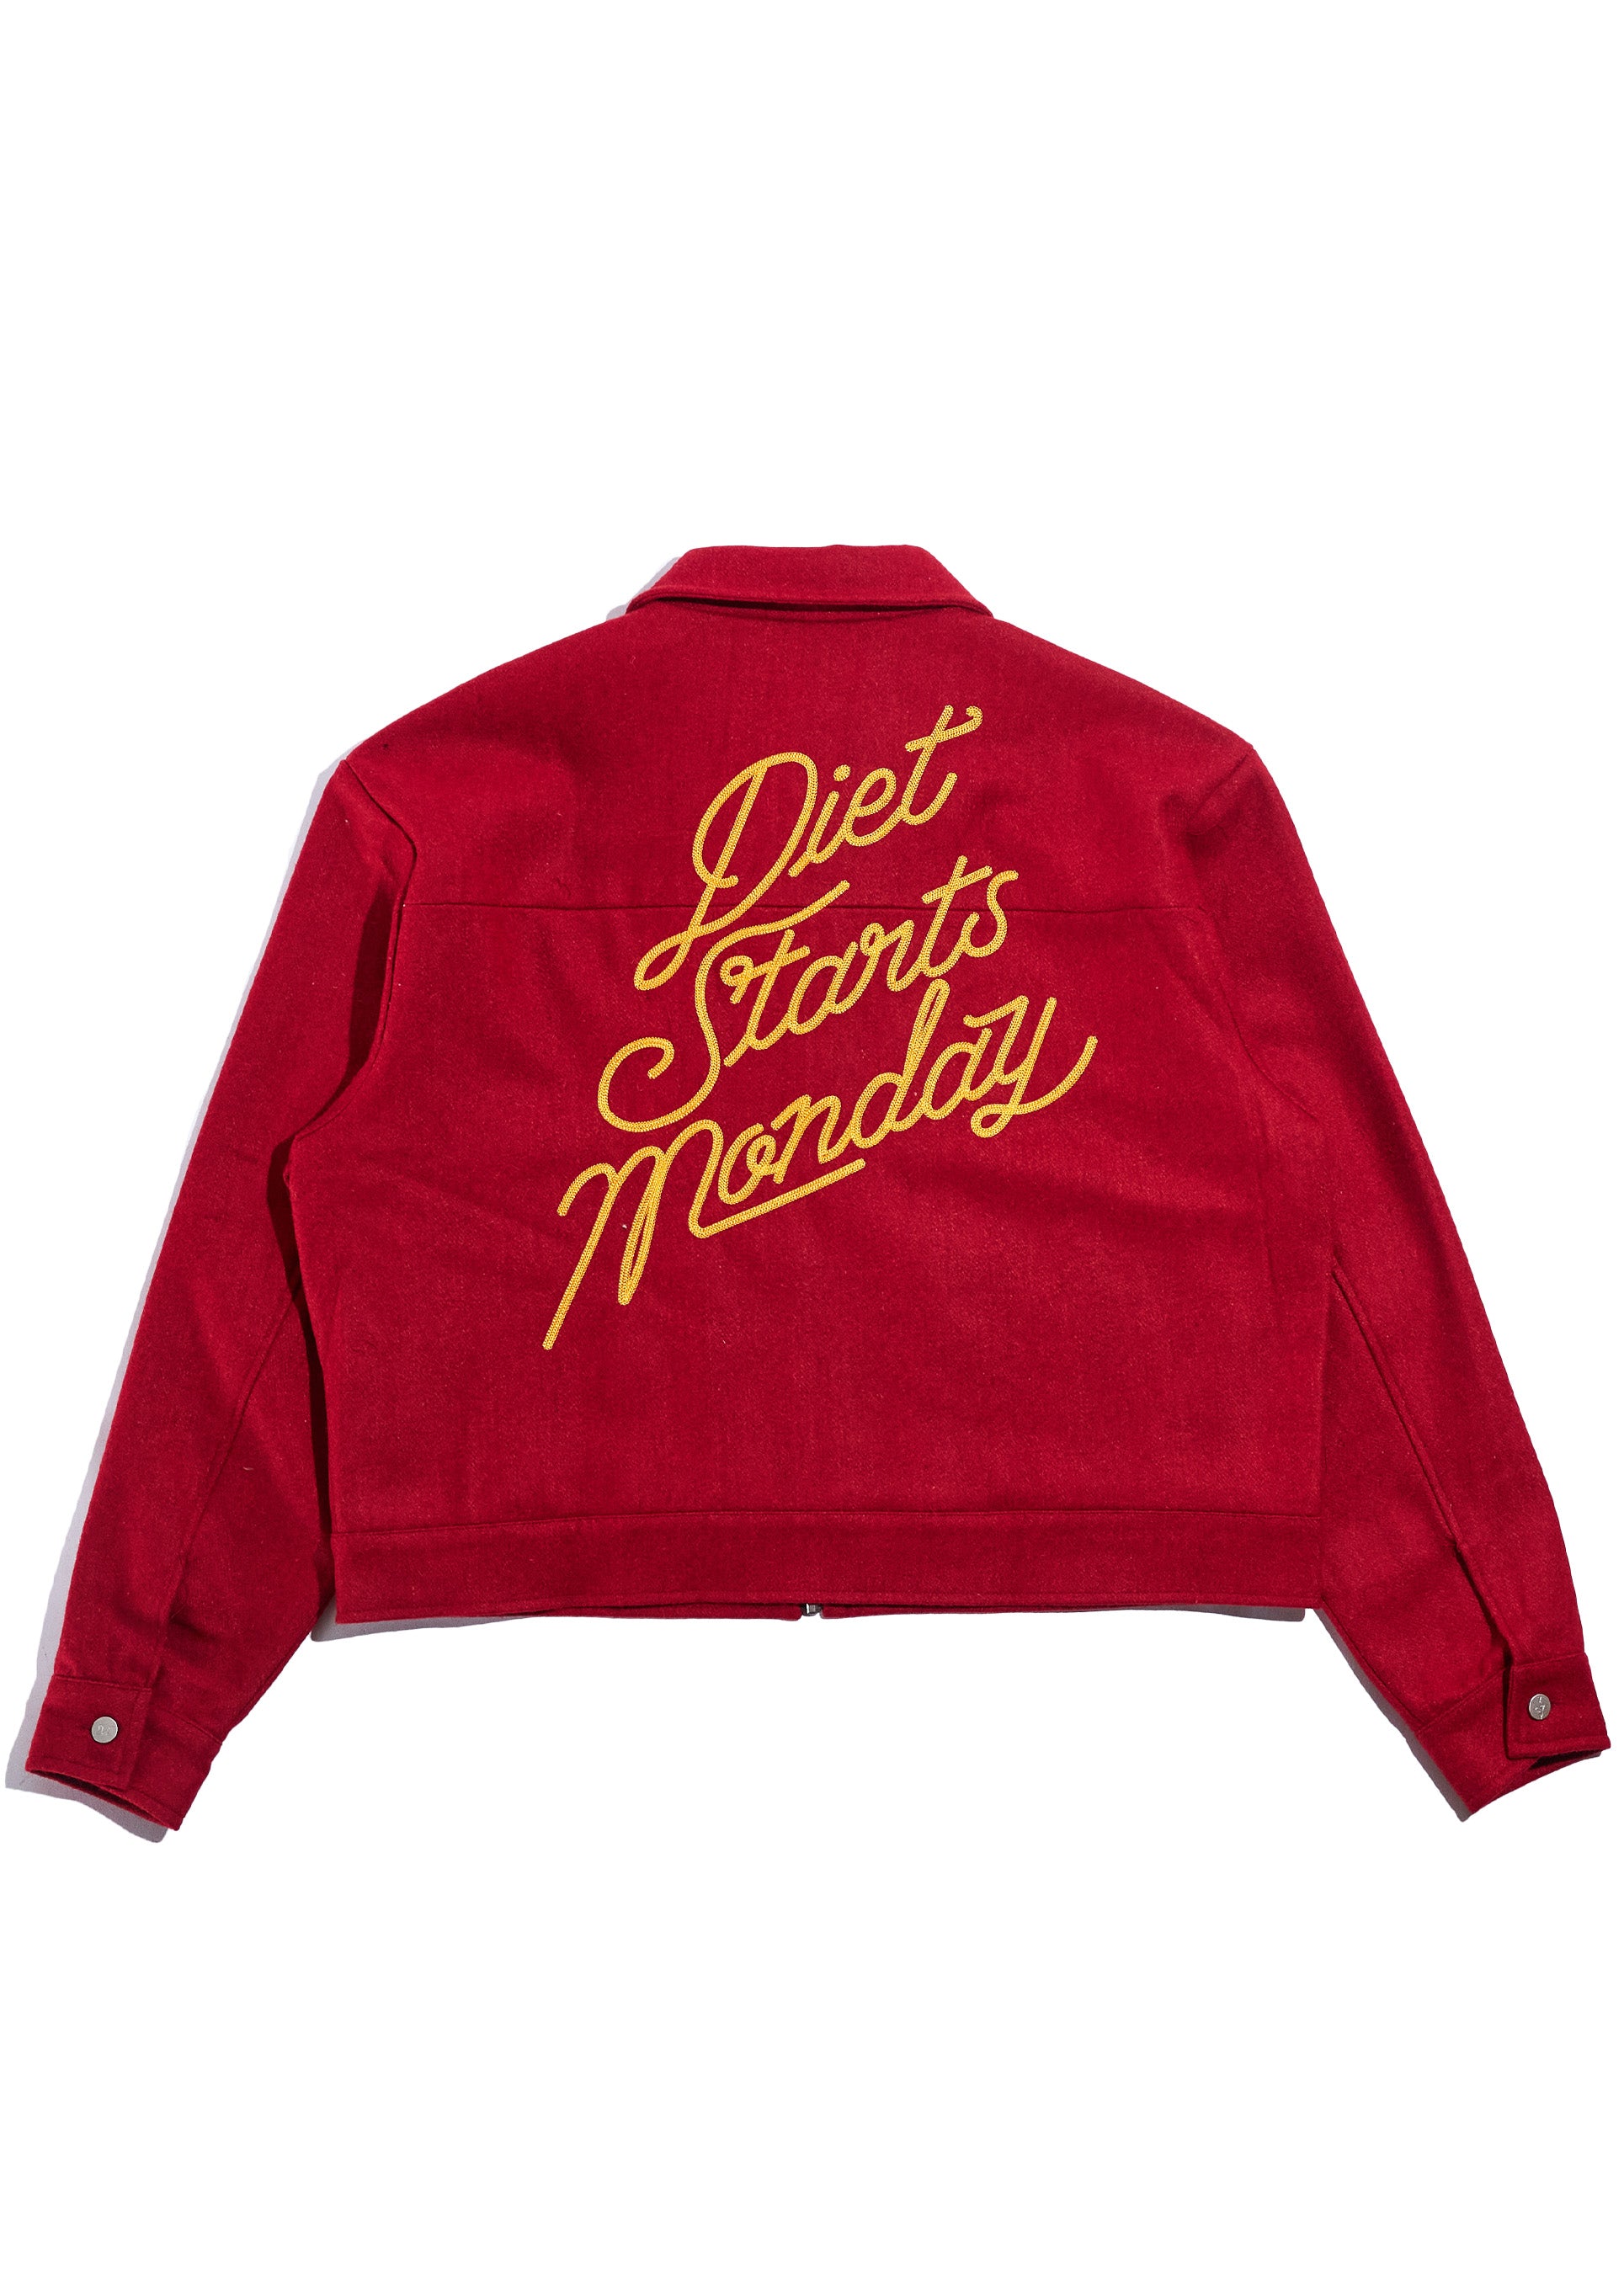 Trouble Jacket - Red